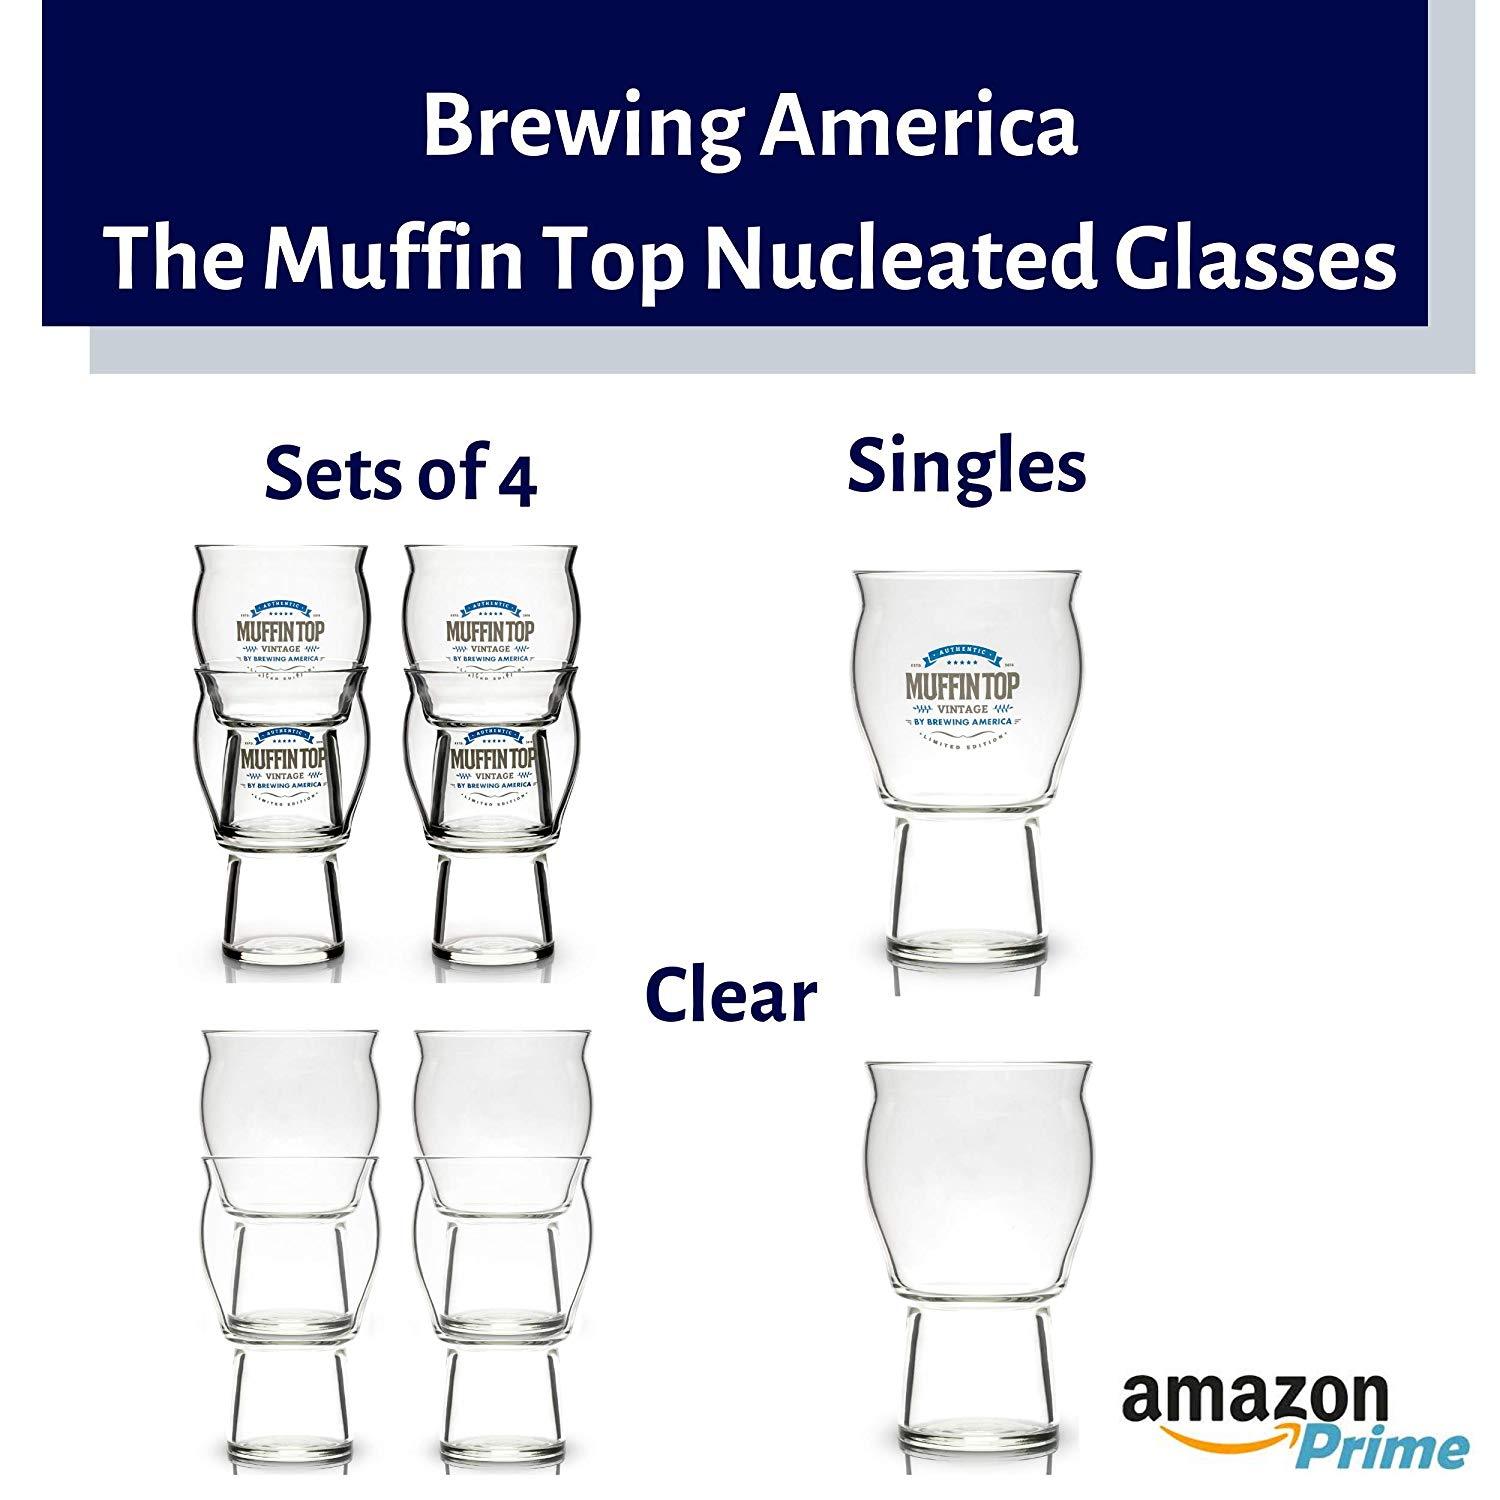 Muffin Top Nucleated Beer Glasses - Pint Glass - Cider, Soda, Tea (Muffin Top Clear Single) Accessories Brewing America 